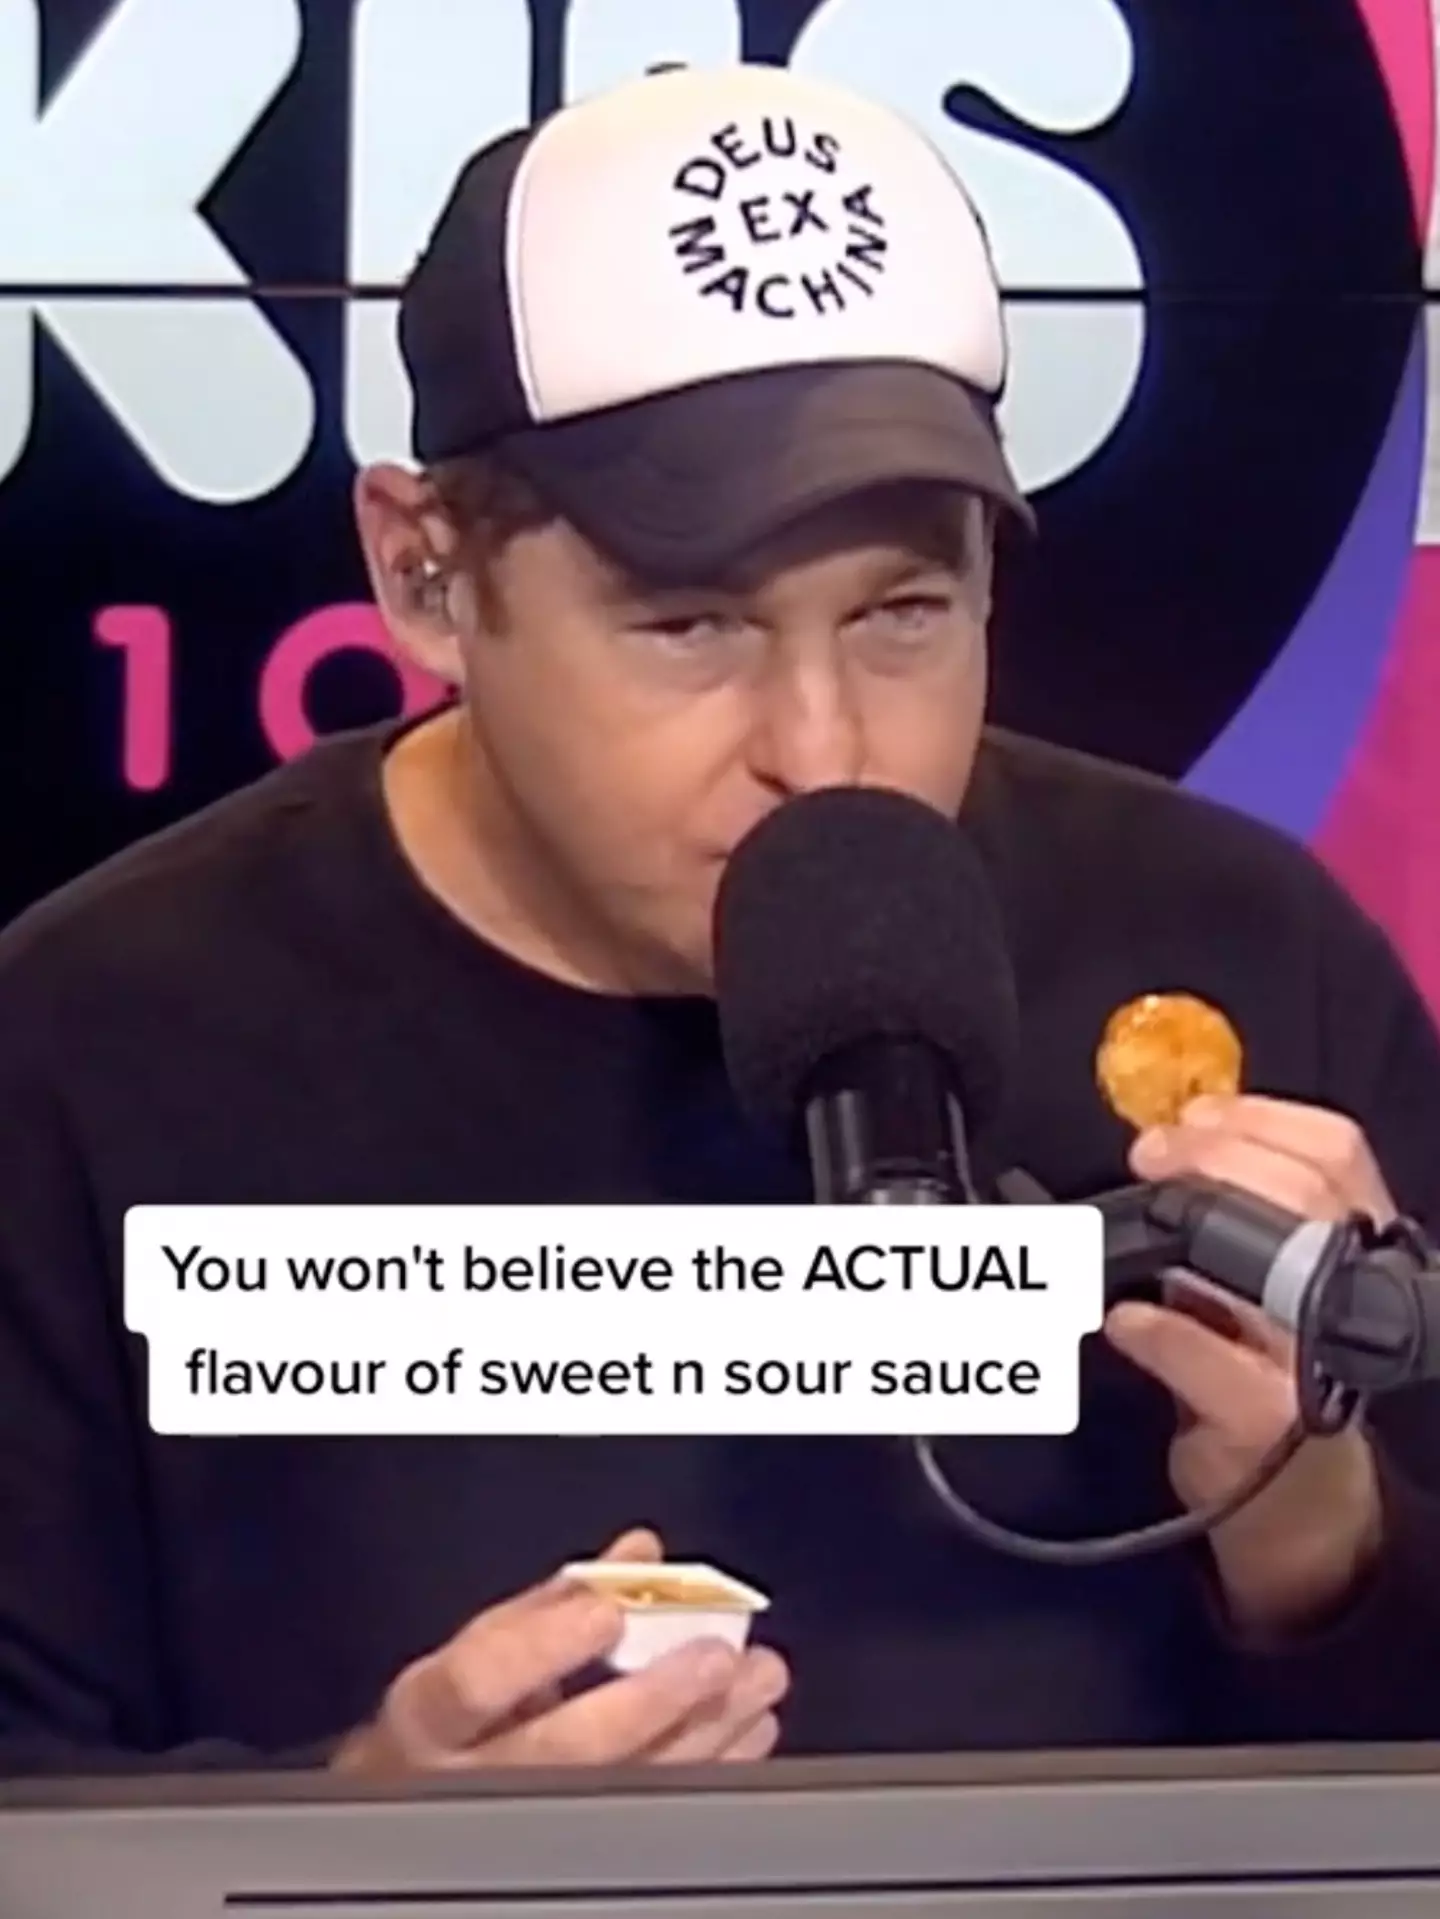 What's in the Sweet 'N Sour sauce?